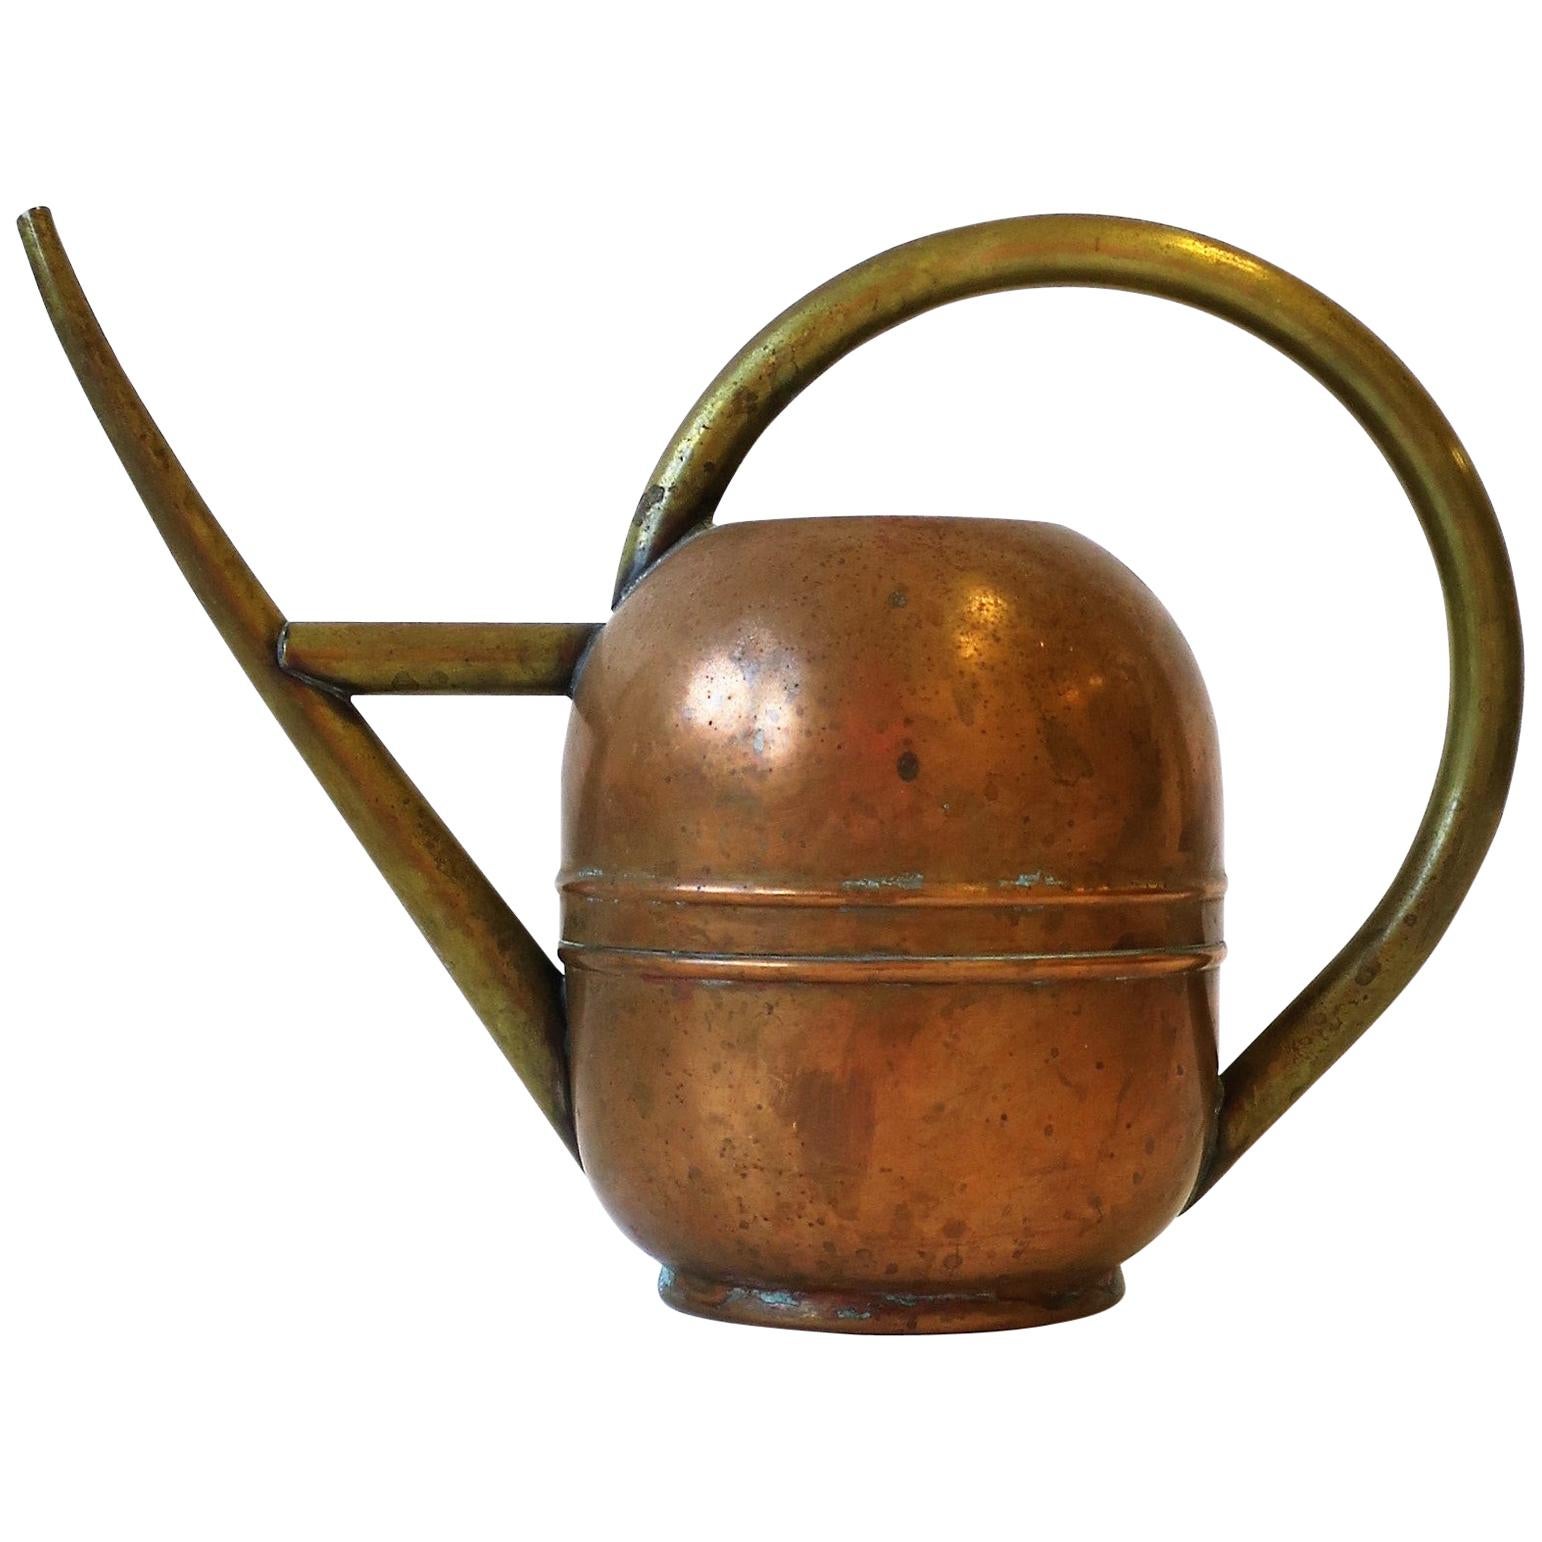 Designer Art Deco Period Brass and Copper Watering Can by Chase